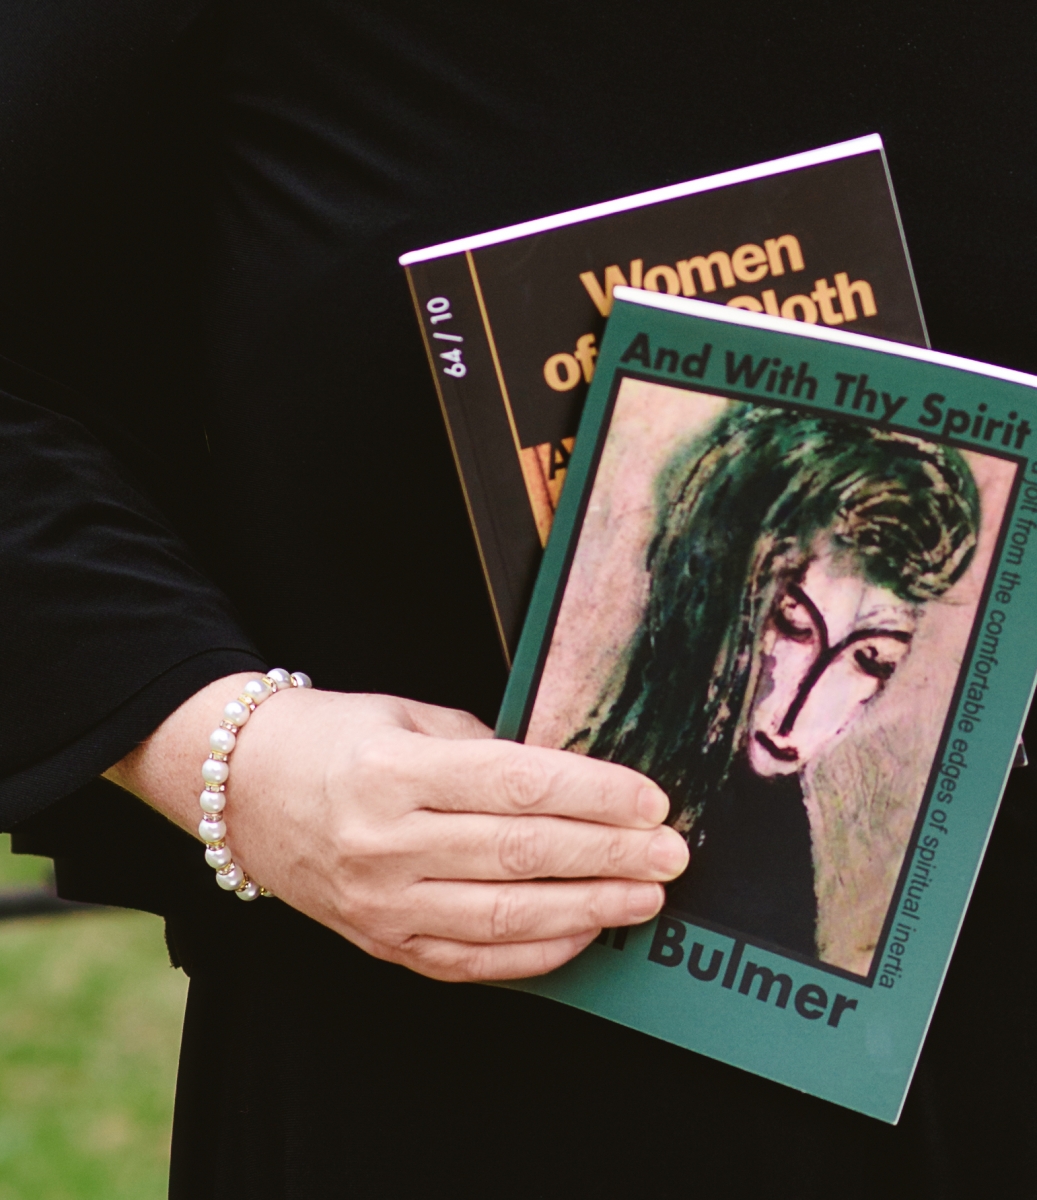 April Bulmer is shown holding two of her published books.